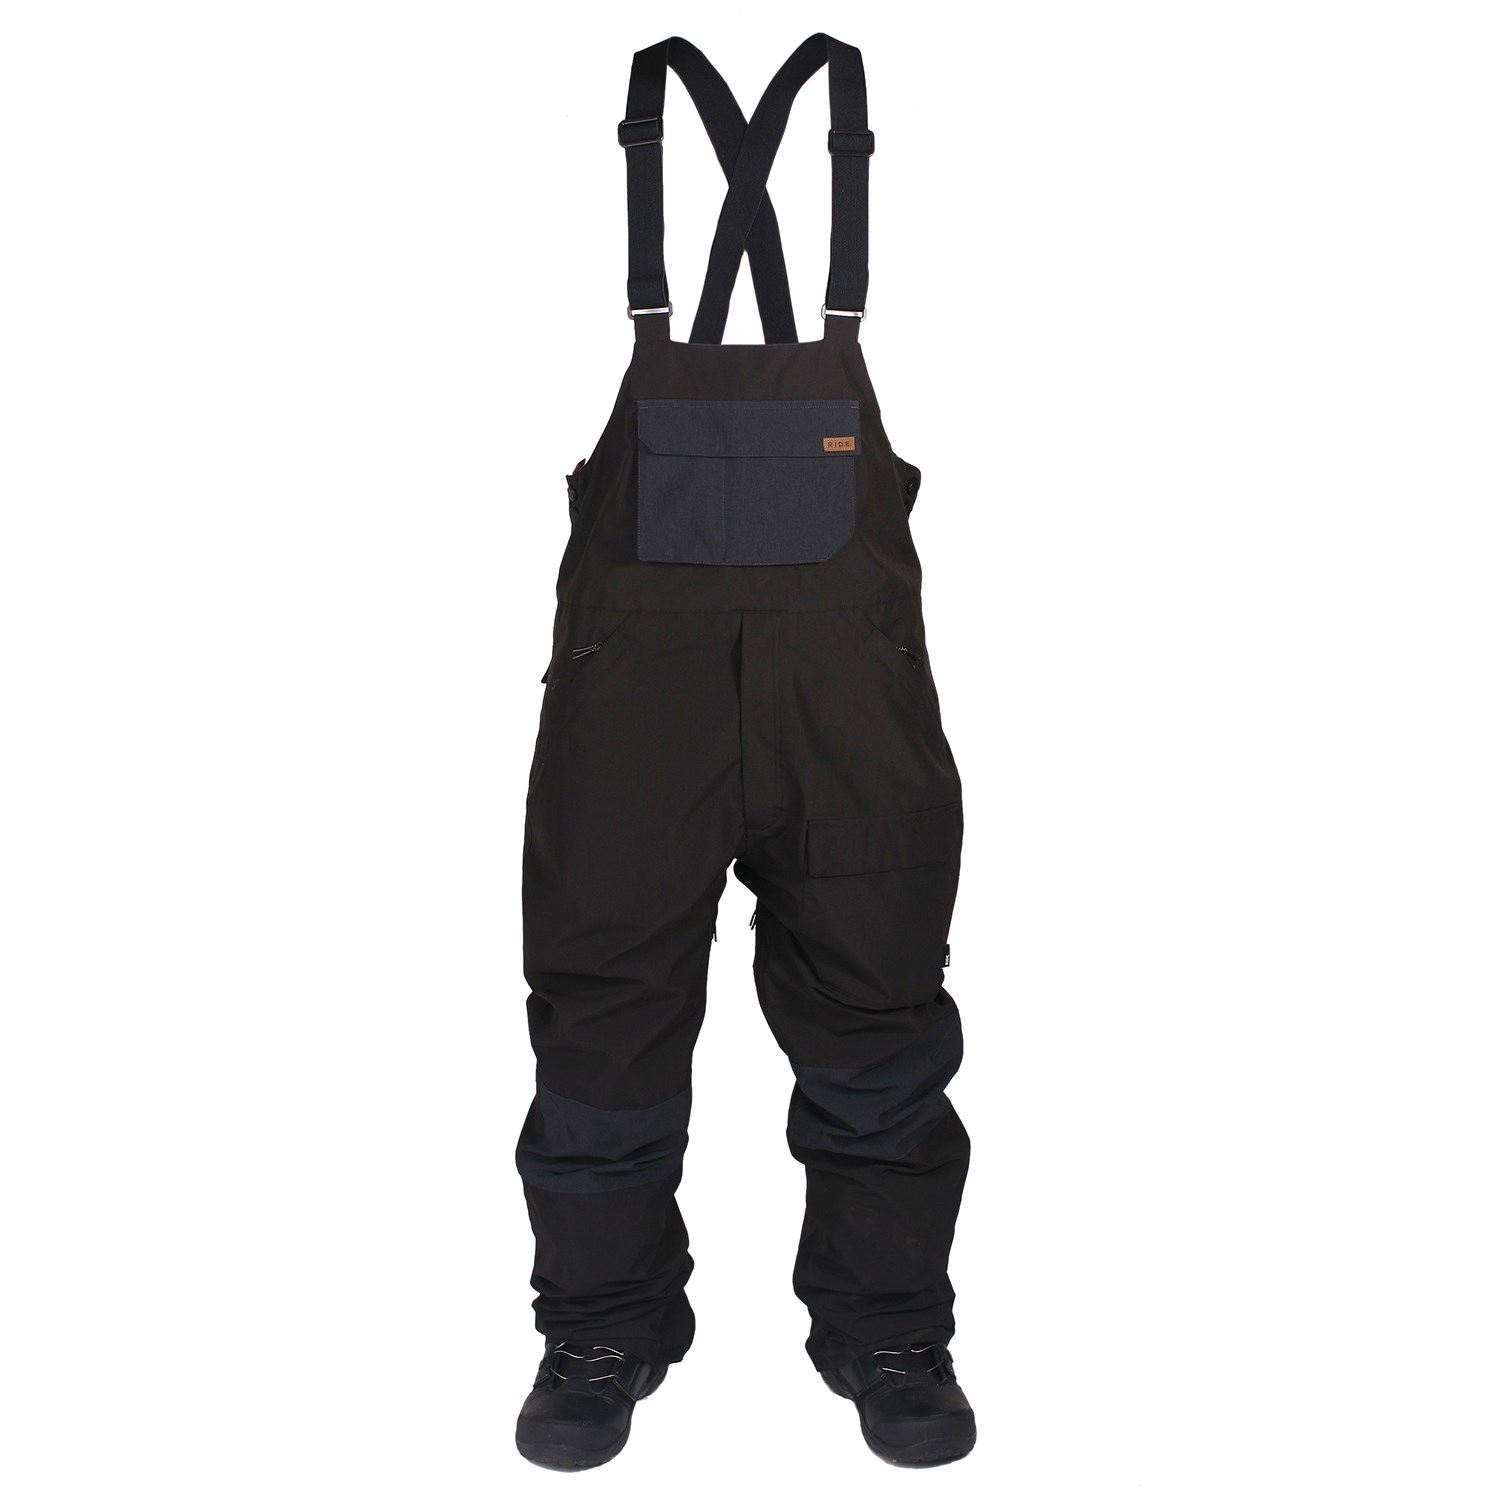 RIDE snowboard pants 28 inch Mens Fashion Bottoms Trousers on Carousell